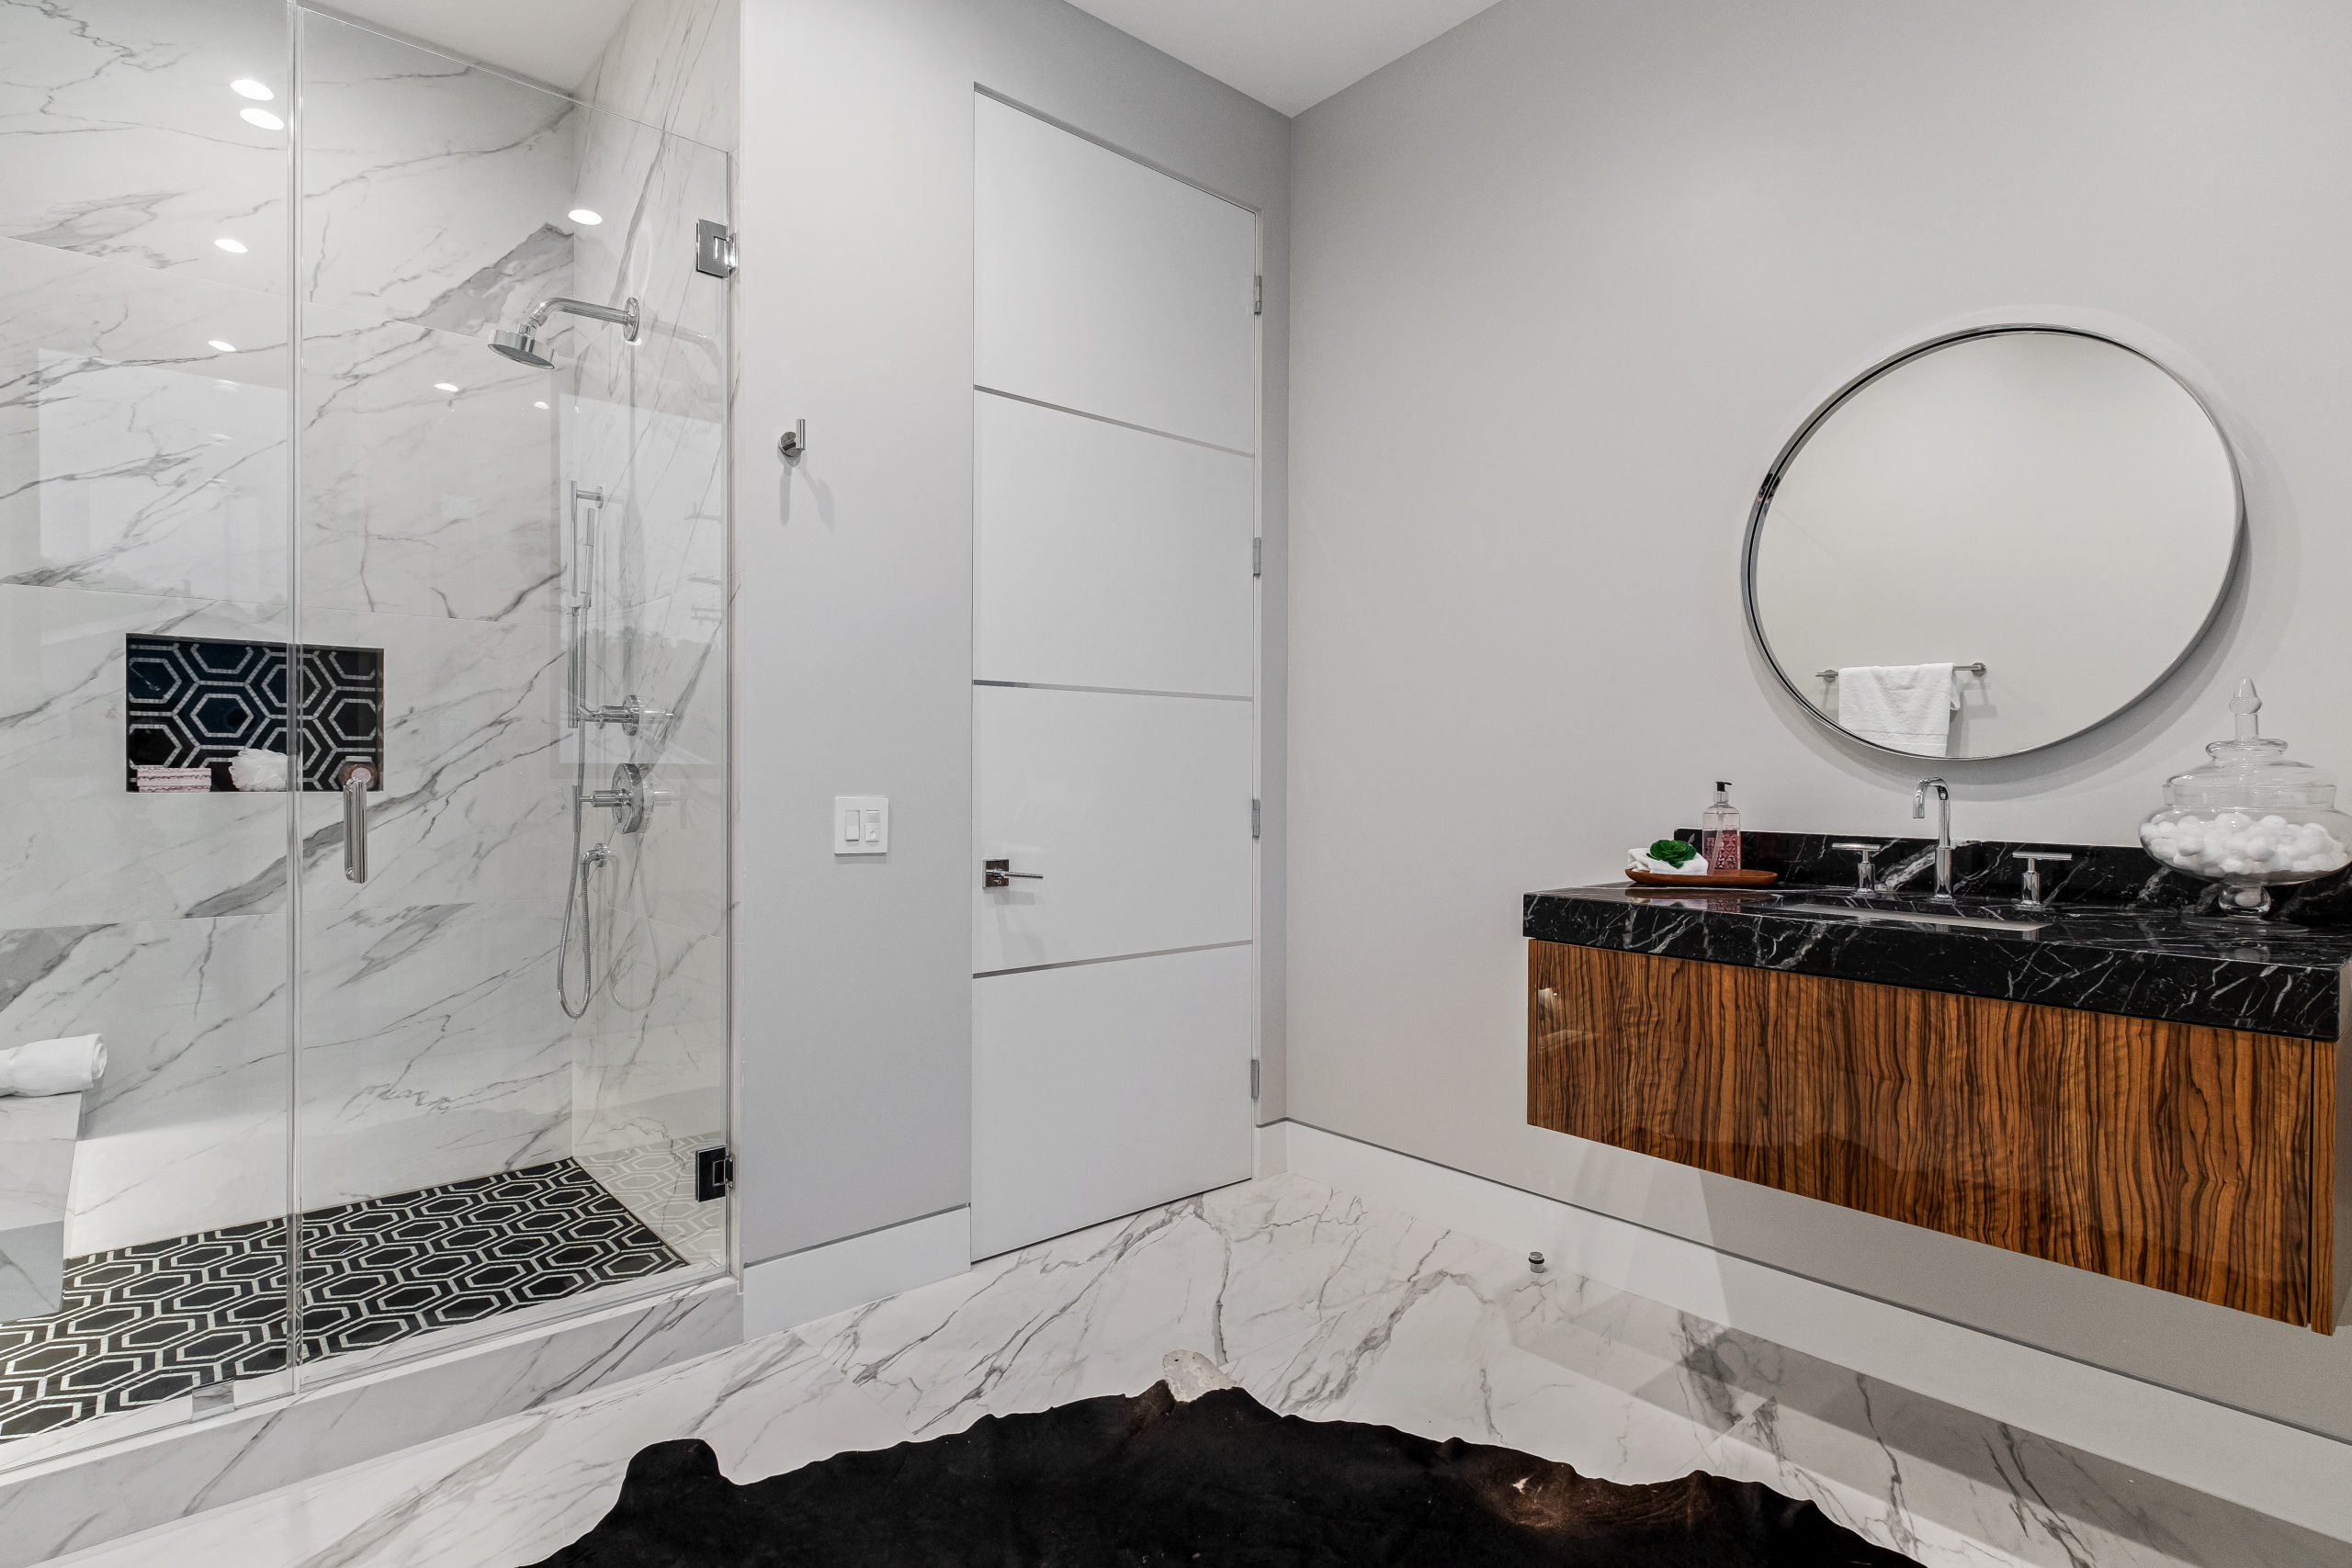 Setting a Realistic Budget for Your Small Bathroom Remodel